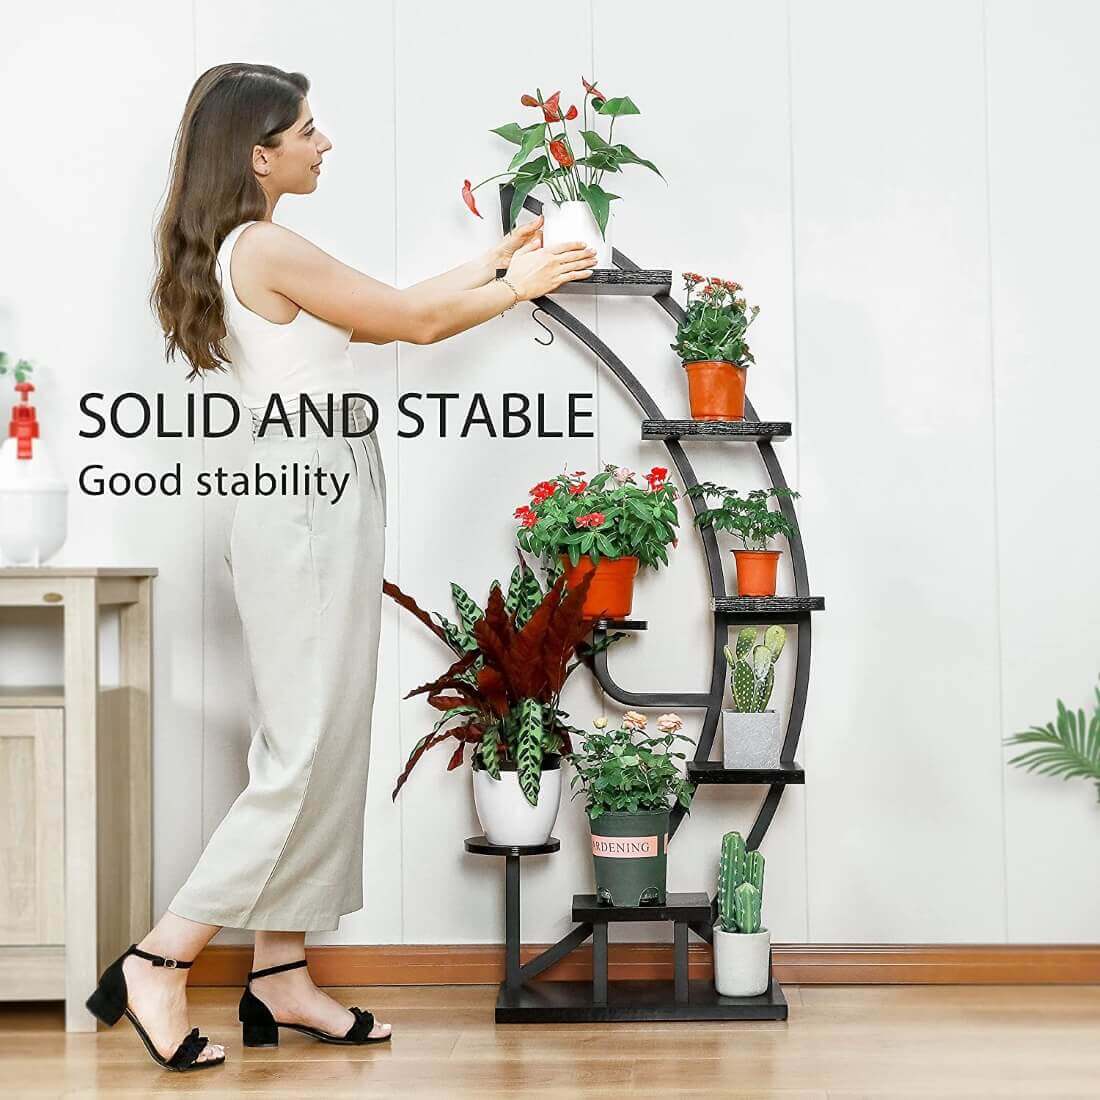 Plant Stands  Plant Stands + Pot Feet for Indoors + Outdoors